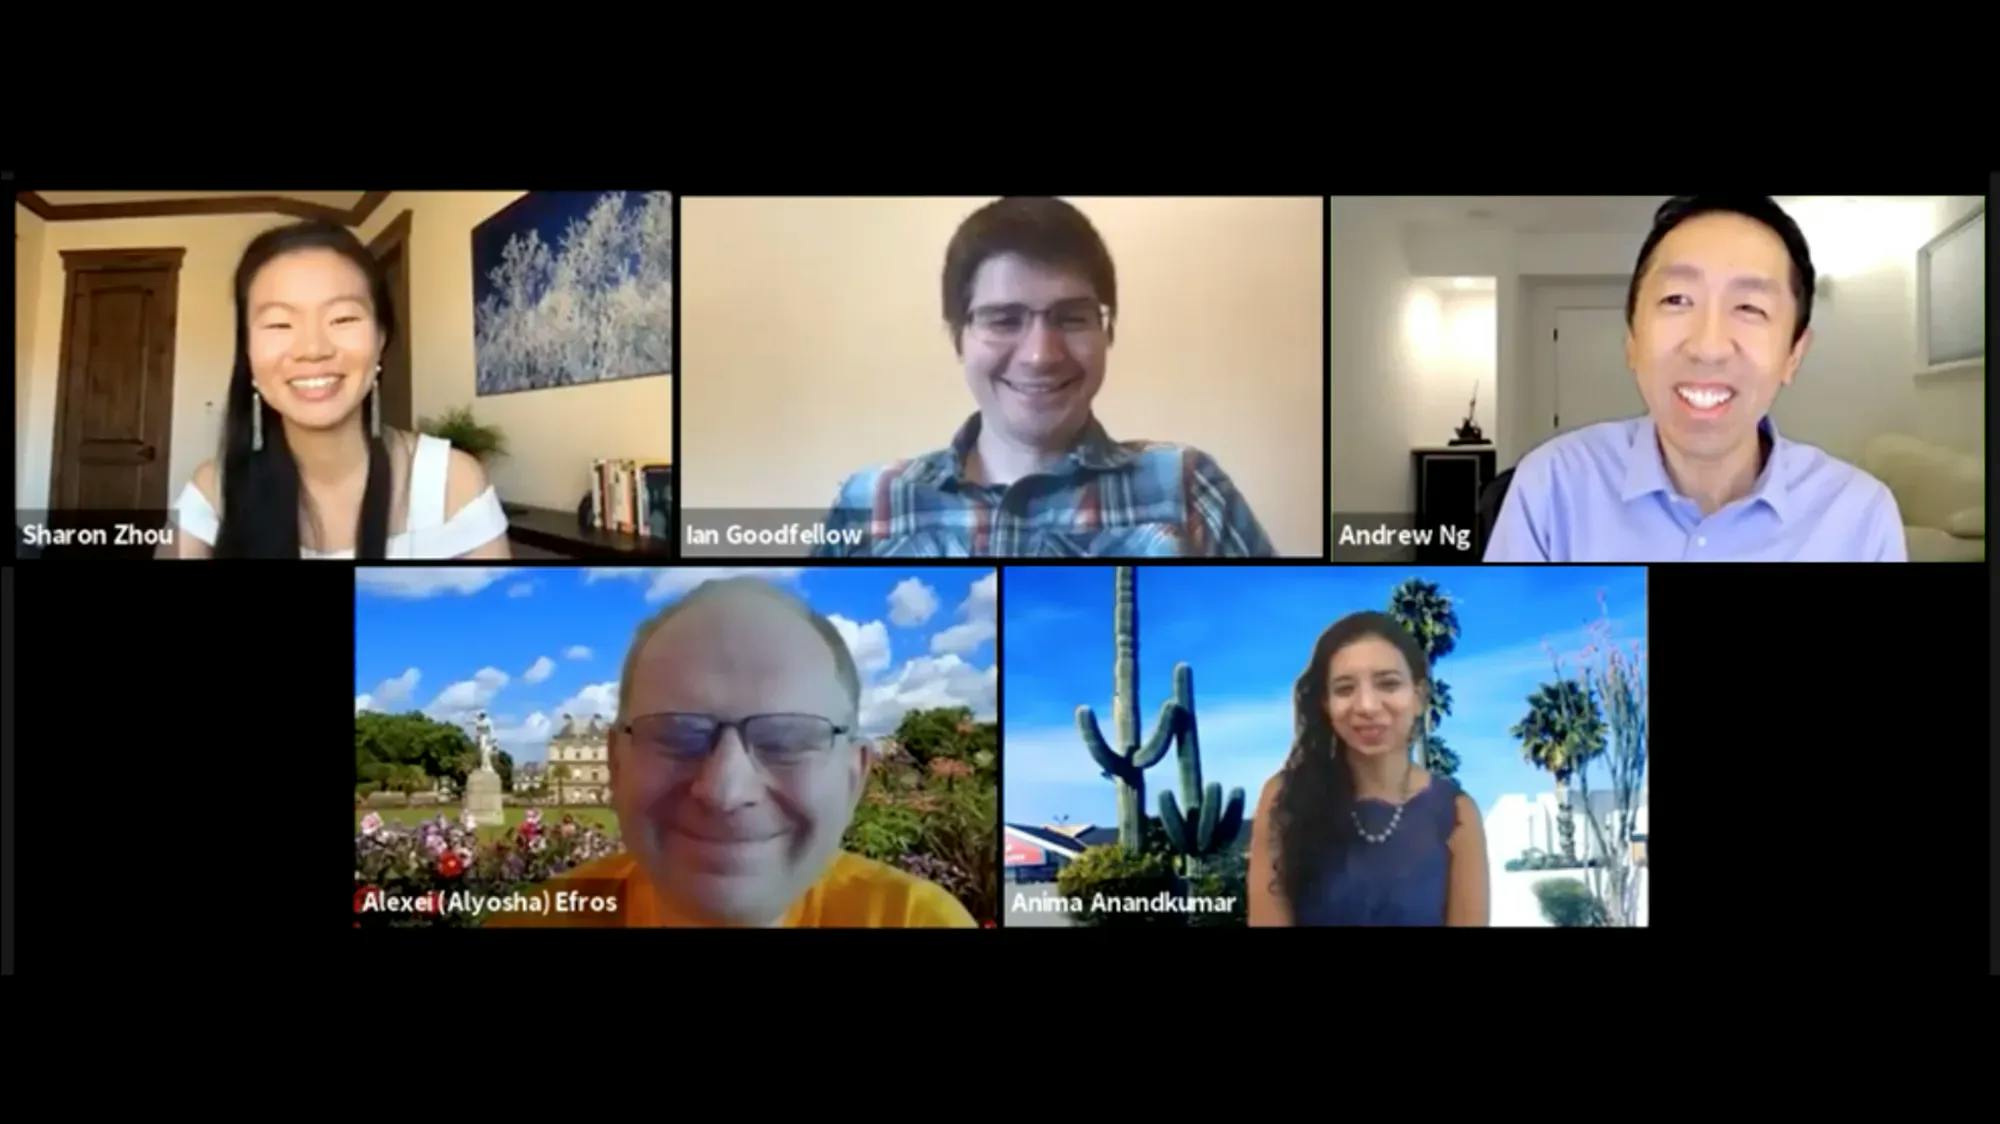 Online panel discussion on “GANs for Good” with Andrew Ng, Anima Anandkumar, Alexei Efros, Ian Goodfellow, and Sharon Zhou